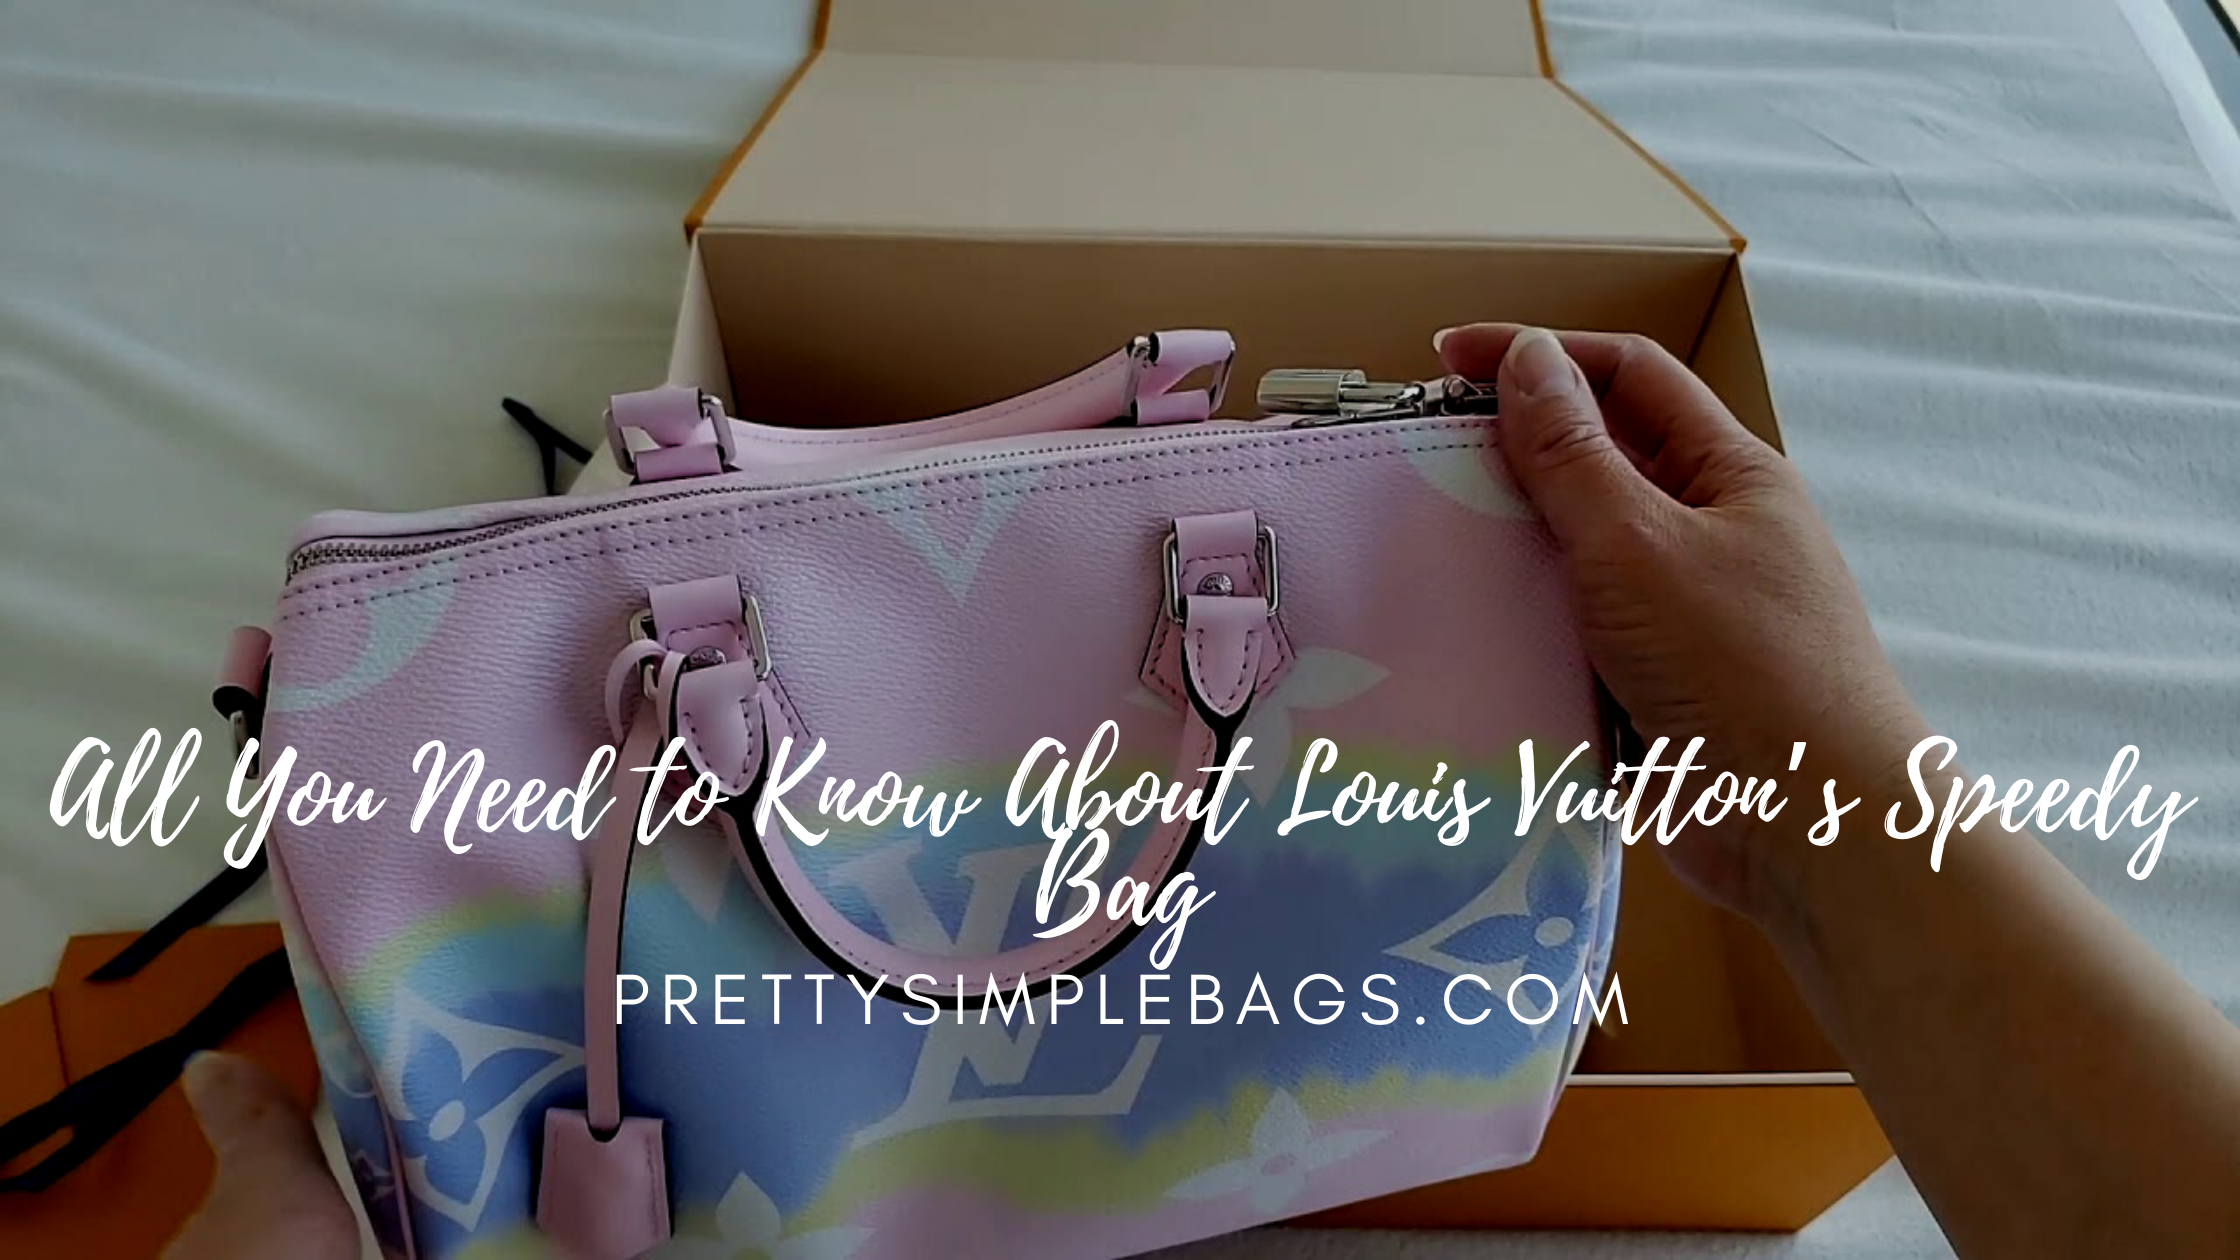 All You Need to Know About Louis Vuitton’s Speedy Bag